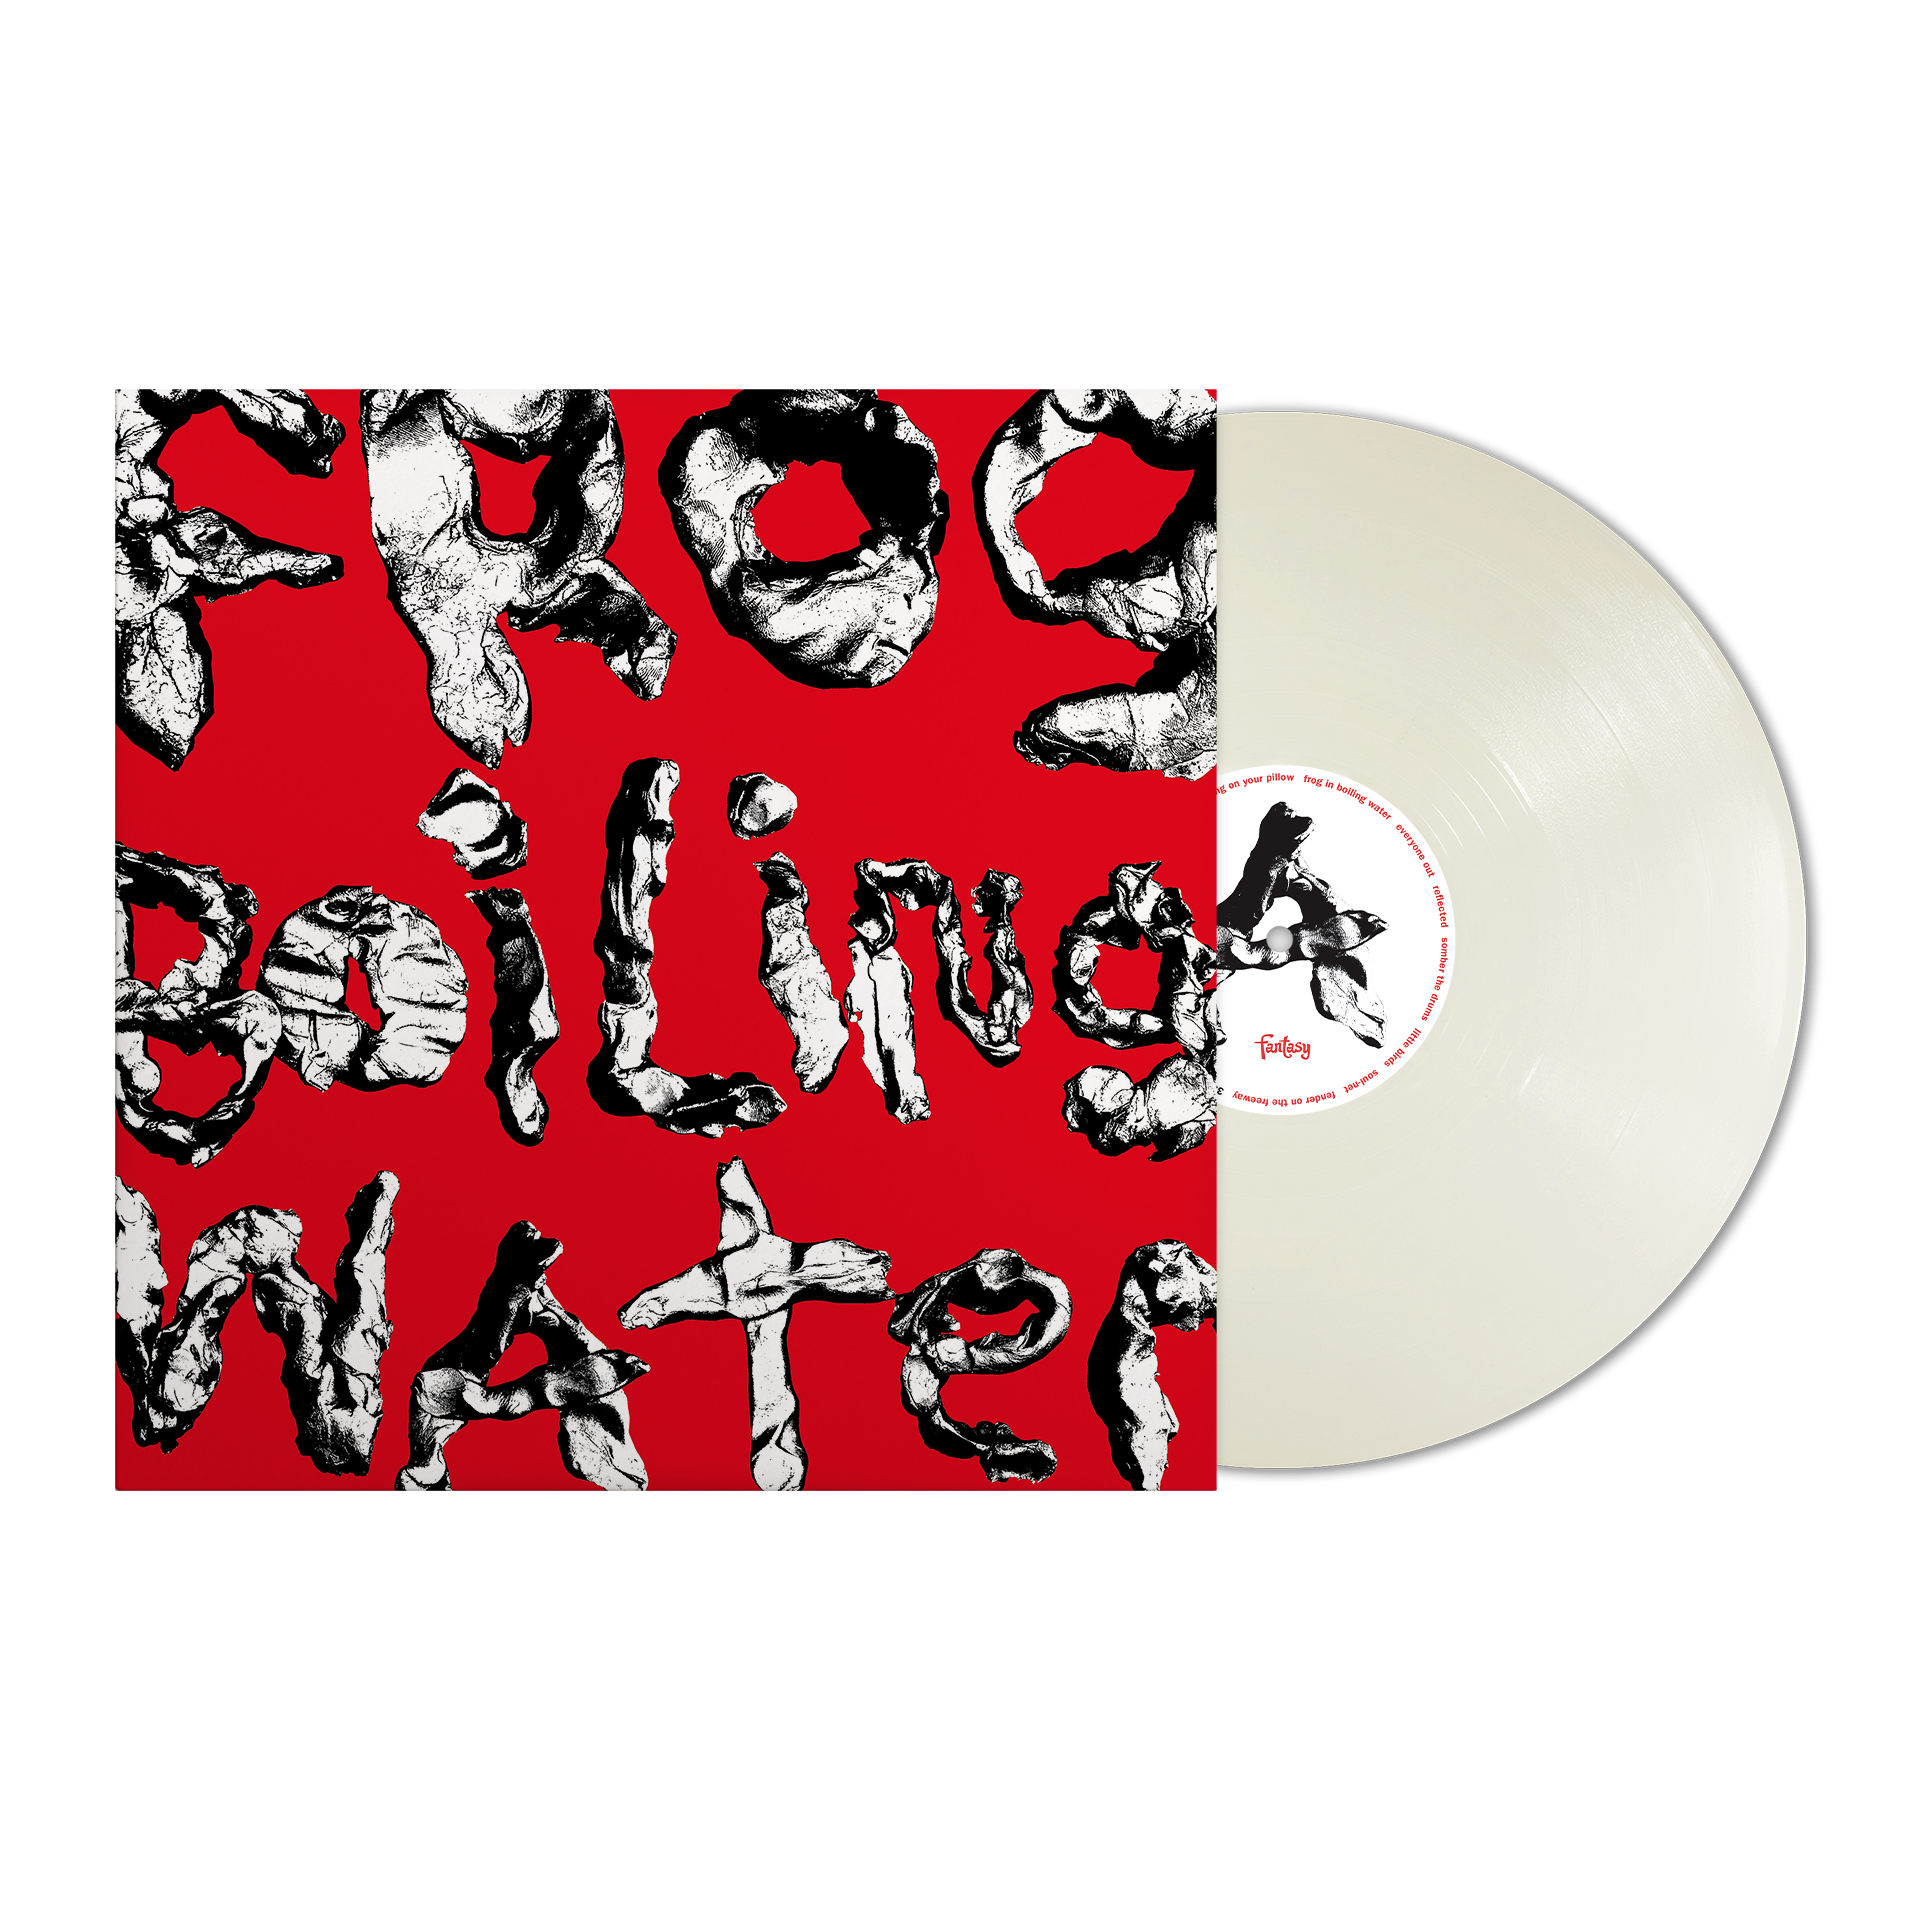 Frog In Boiling Water: Limited Opaque White Vinyl LP + Exclusive Signed Print